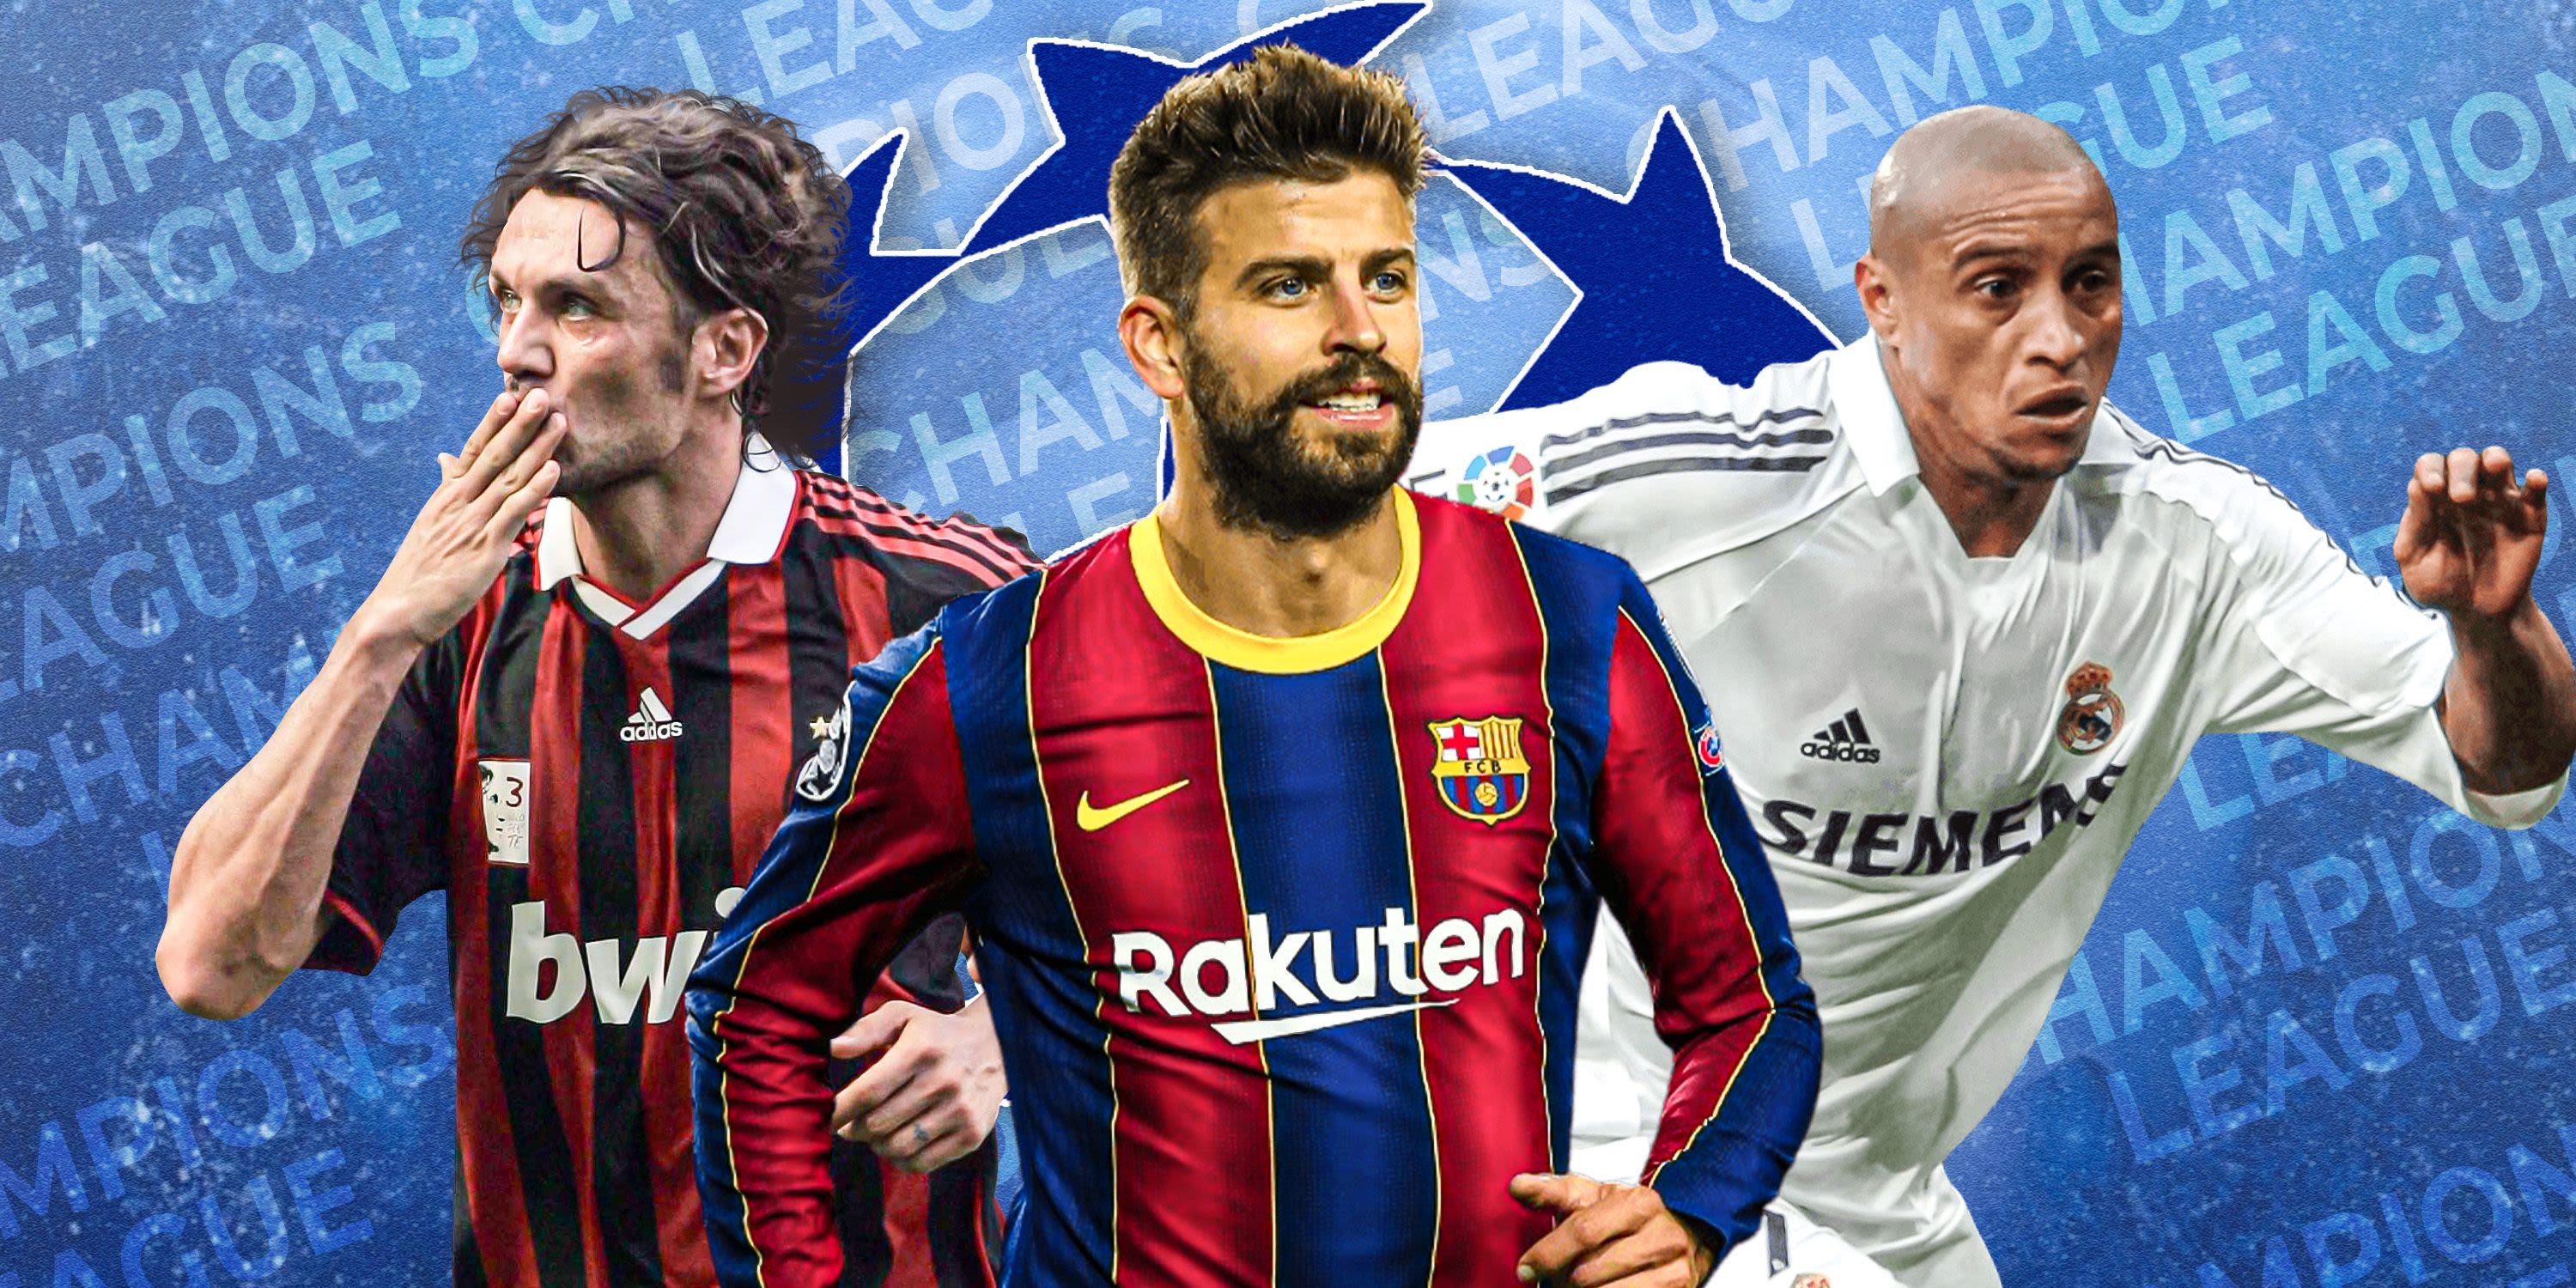 The 10 greatest defenders in Champions League history have been ranked